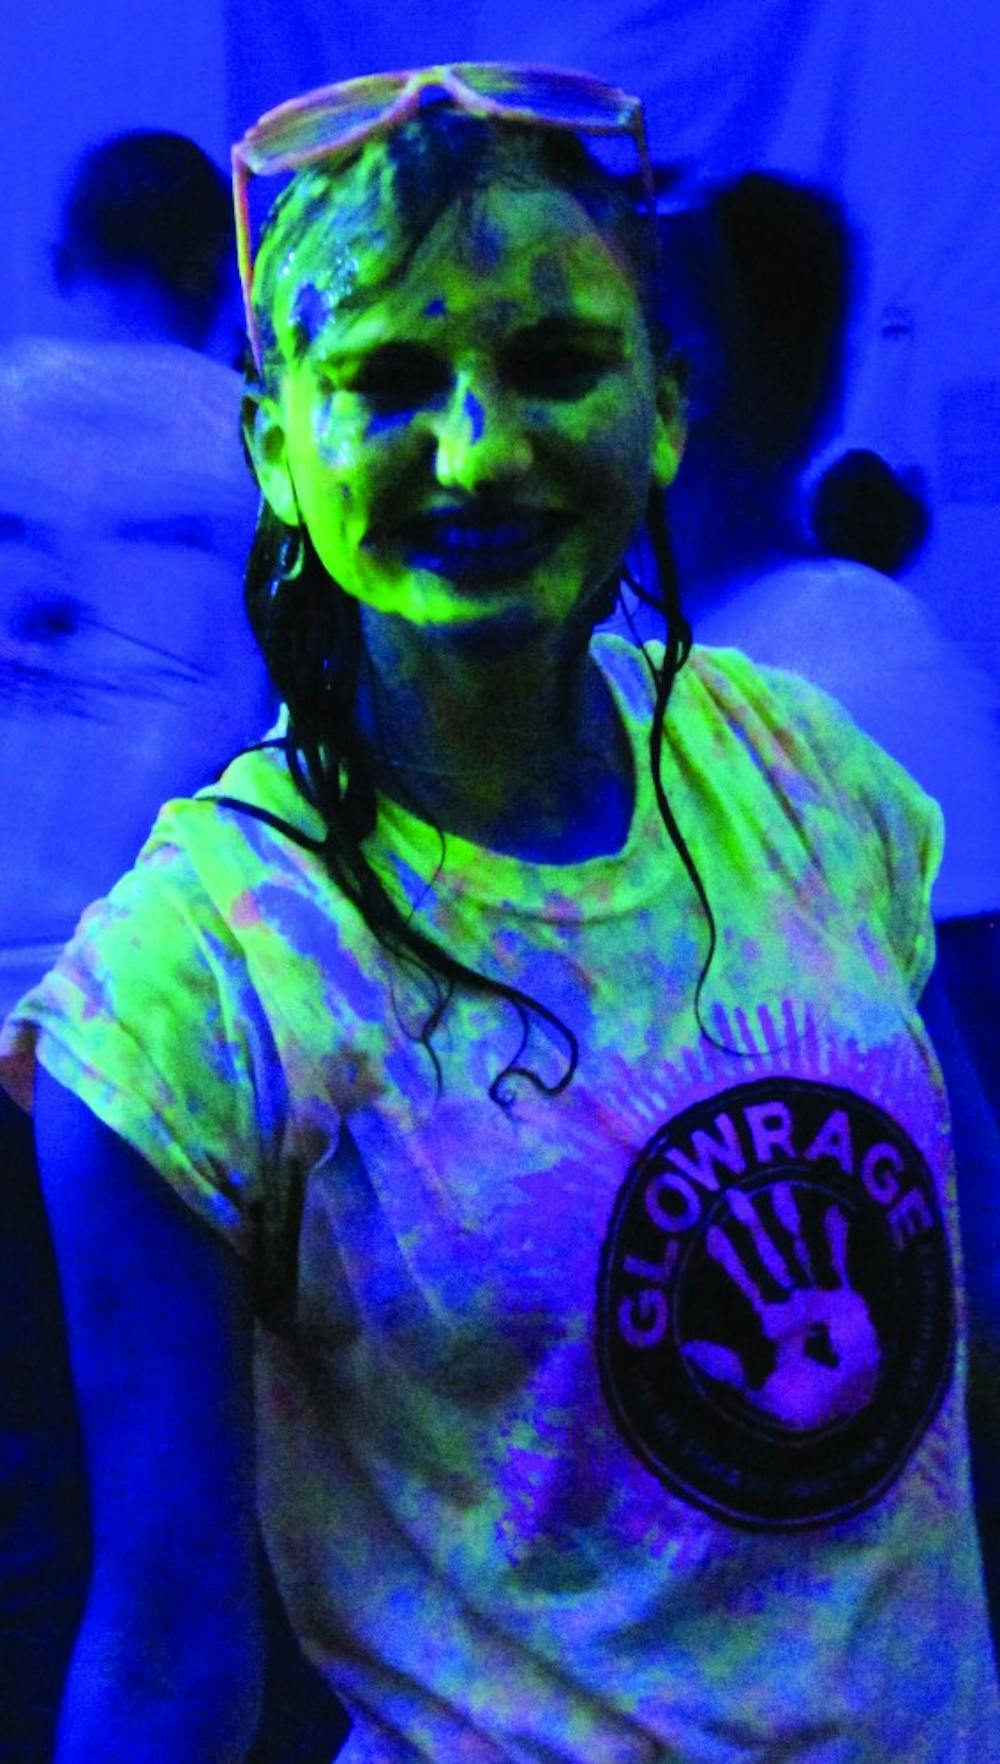 Students prepare for finals with a paint-covered “Glowrage”